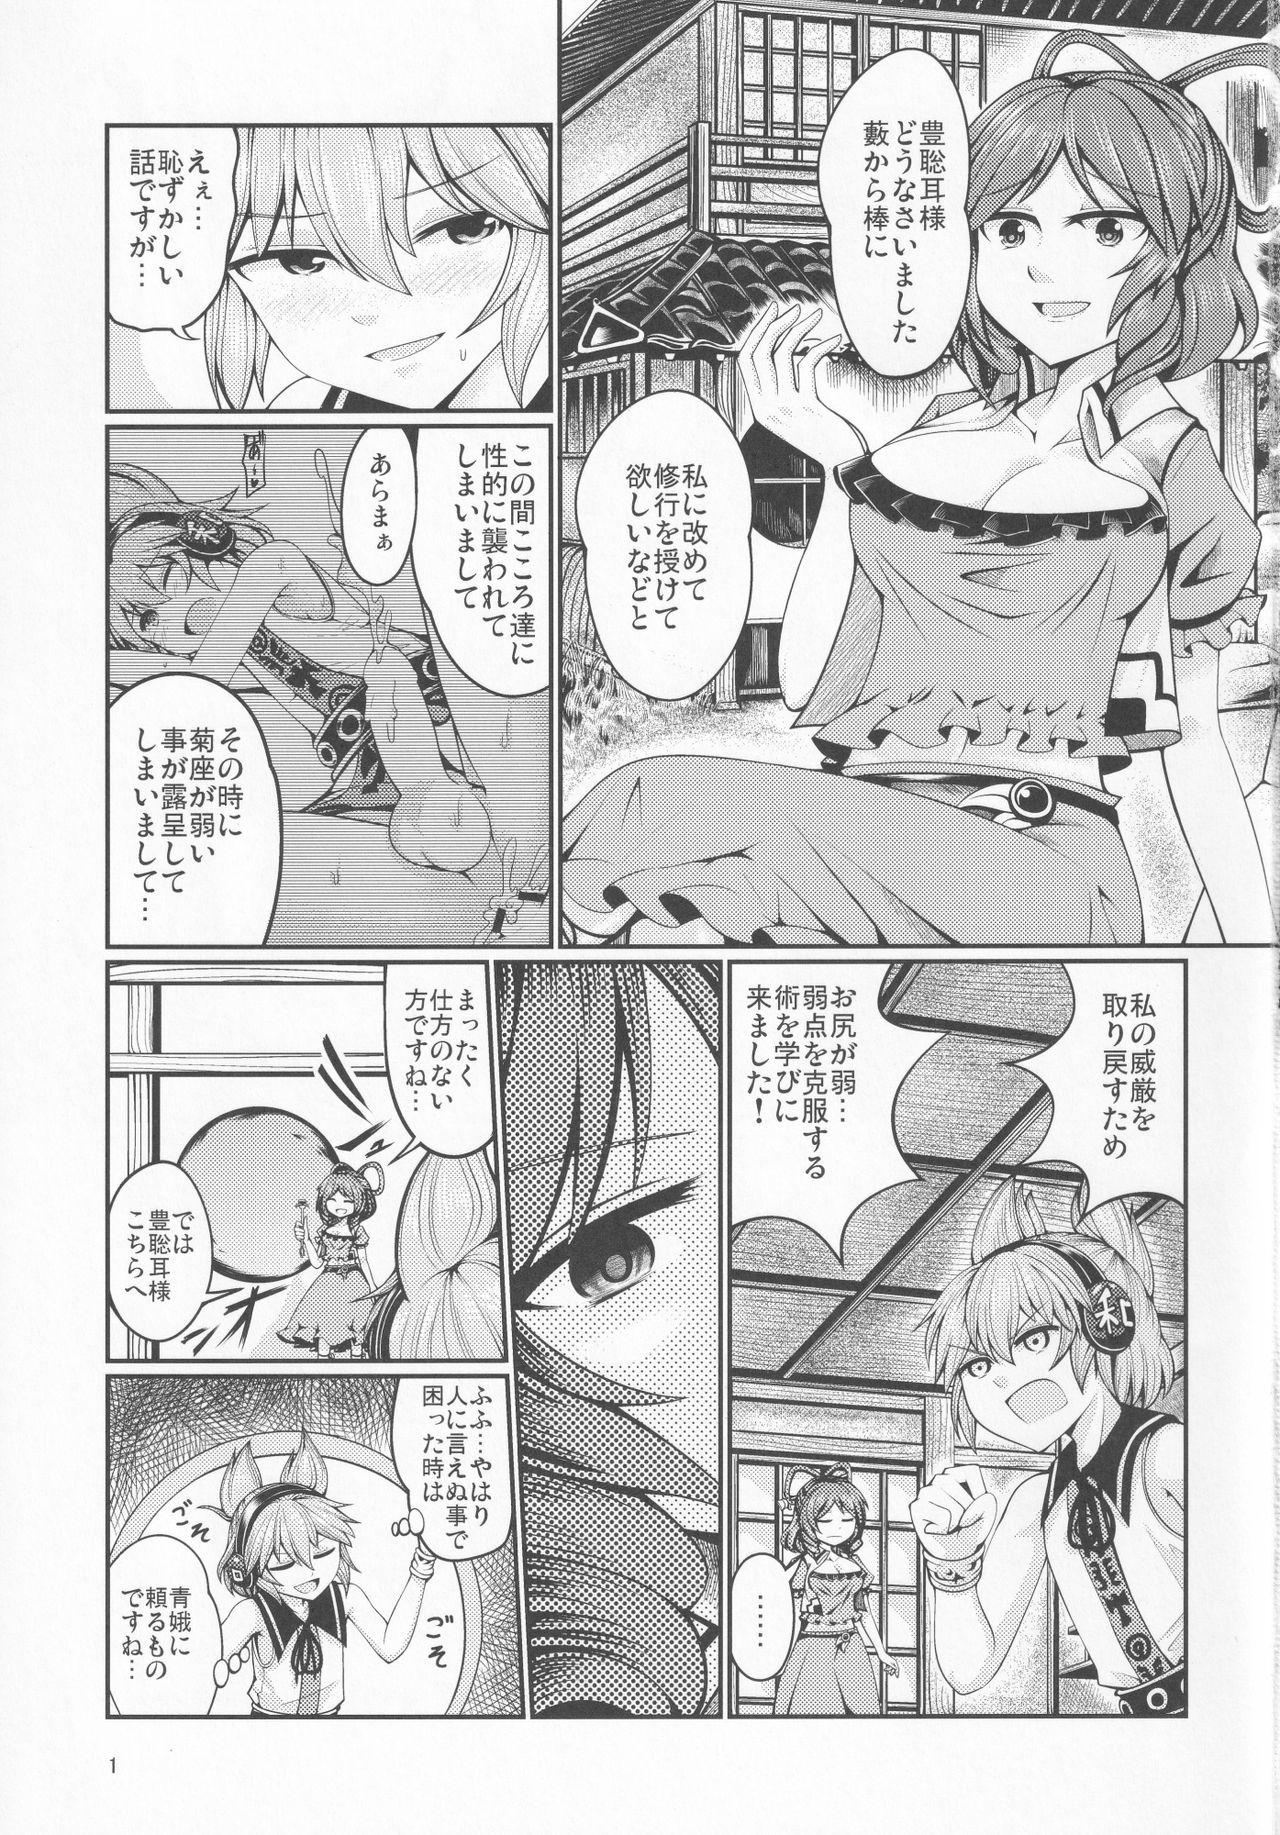 Fresh Reverse Sexuality 4 - Touhou project Gemidos - Page 2